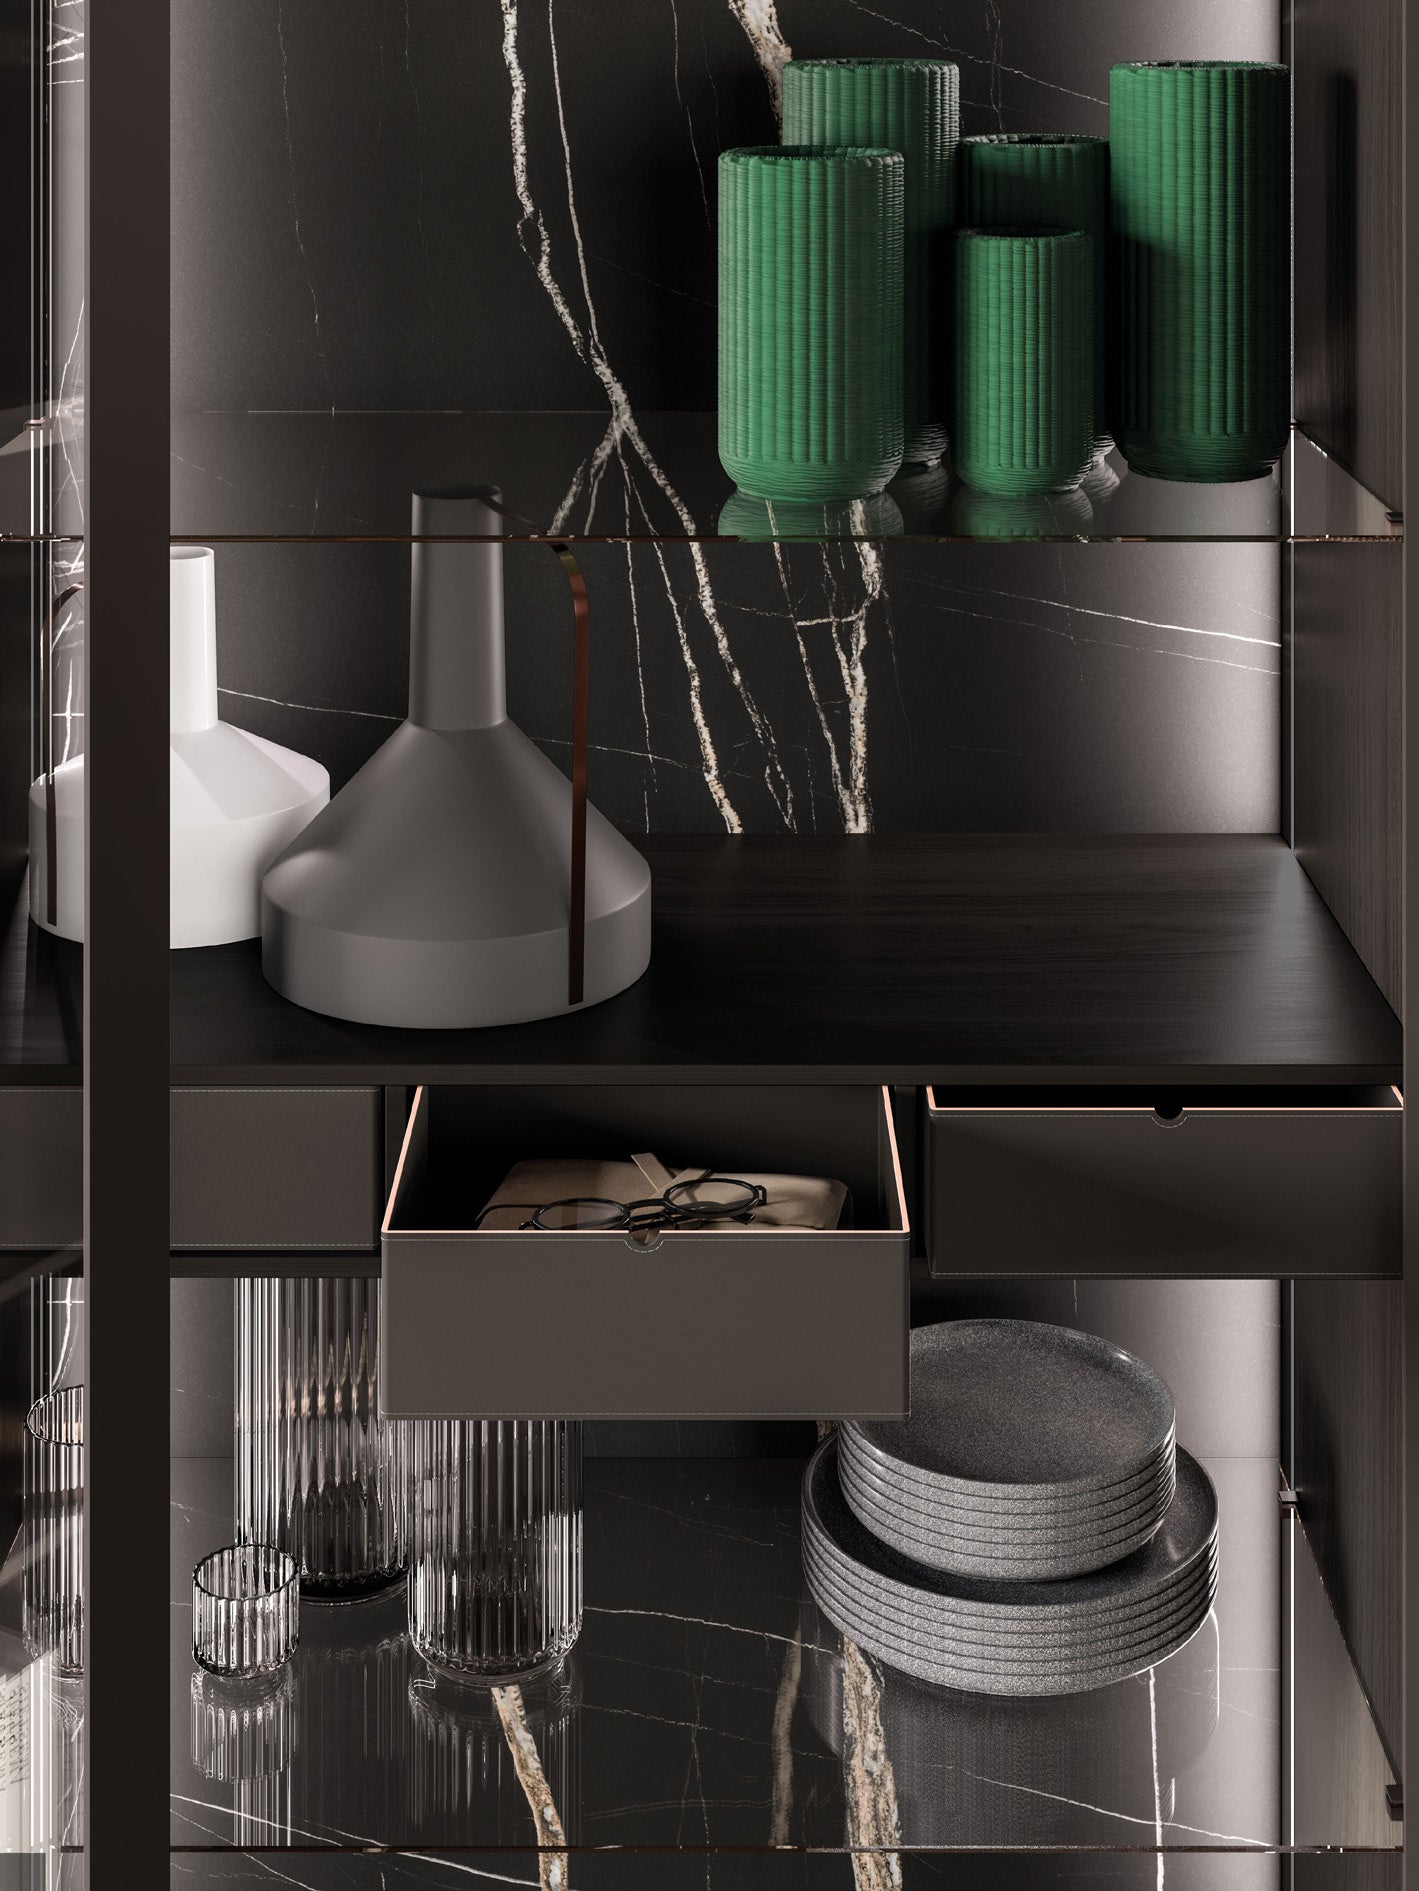 Day 31-23 Logico Bookcase Wall Unit by Orme Design